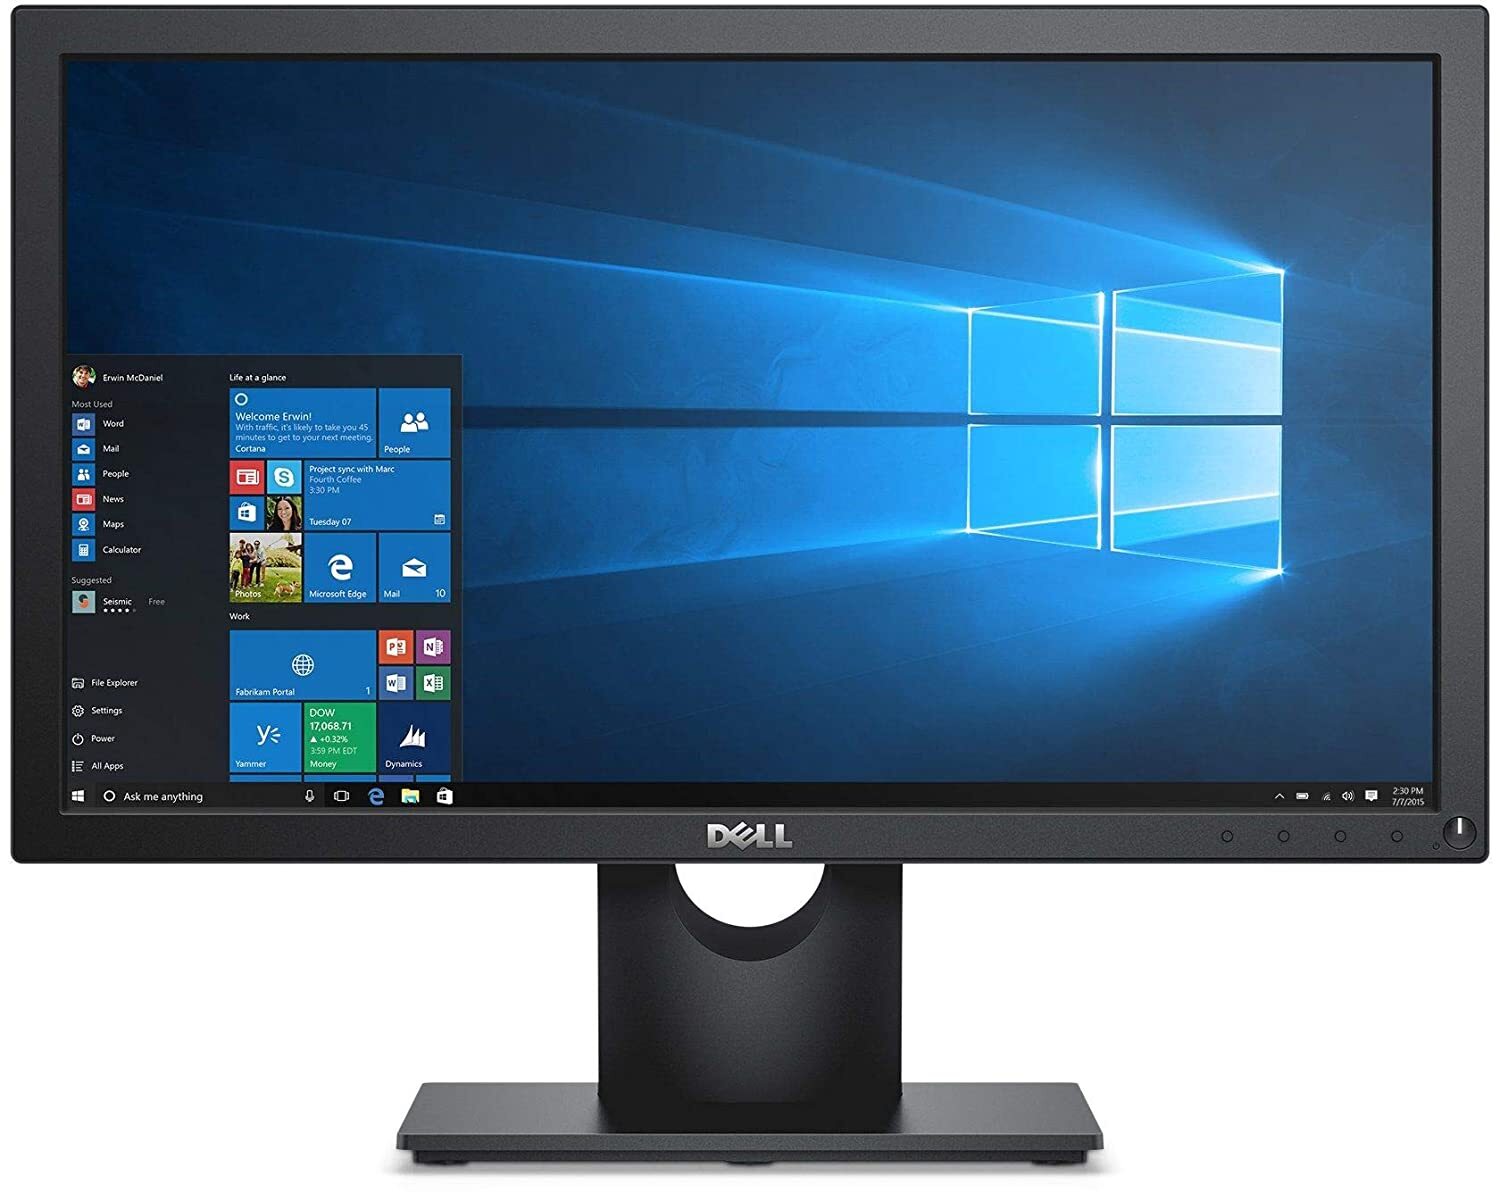 Dell Desktop OptiPlex 3070 Business MT with i3-9100, 4GB RAM, 1TB Hard drive, No DVD, DOS OS with LED Monitor 19.5" E2016H-M000000000343 www.mysocially.com